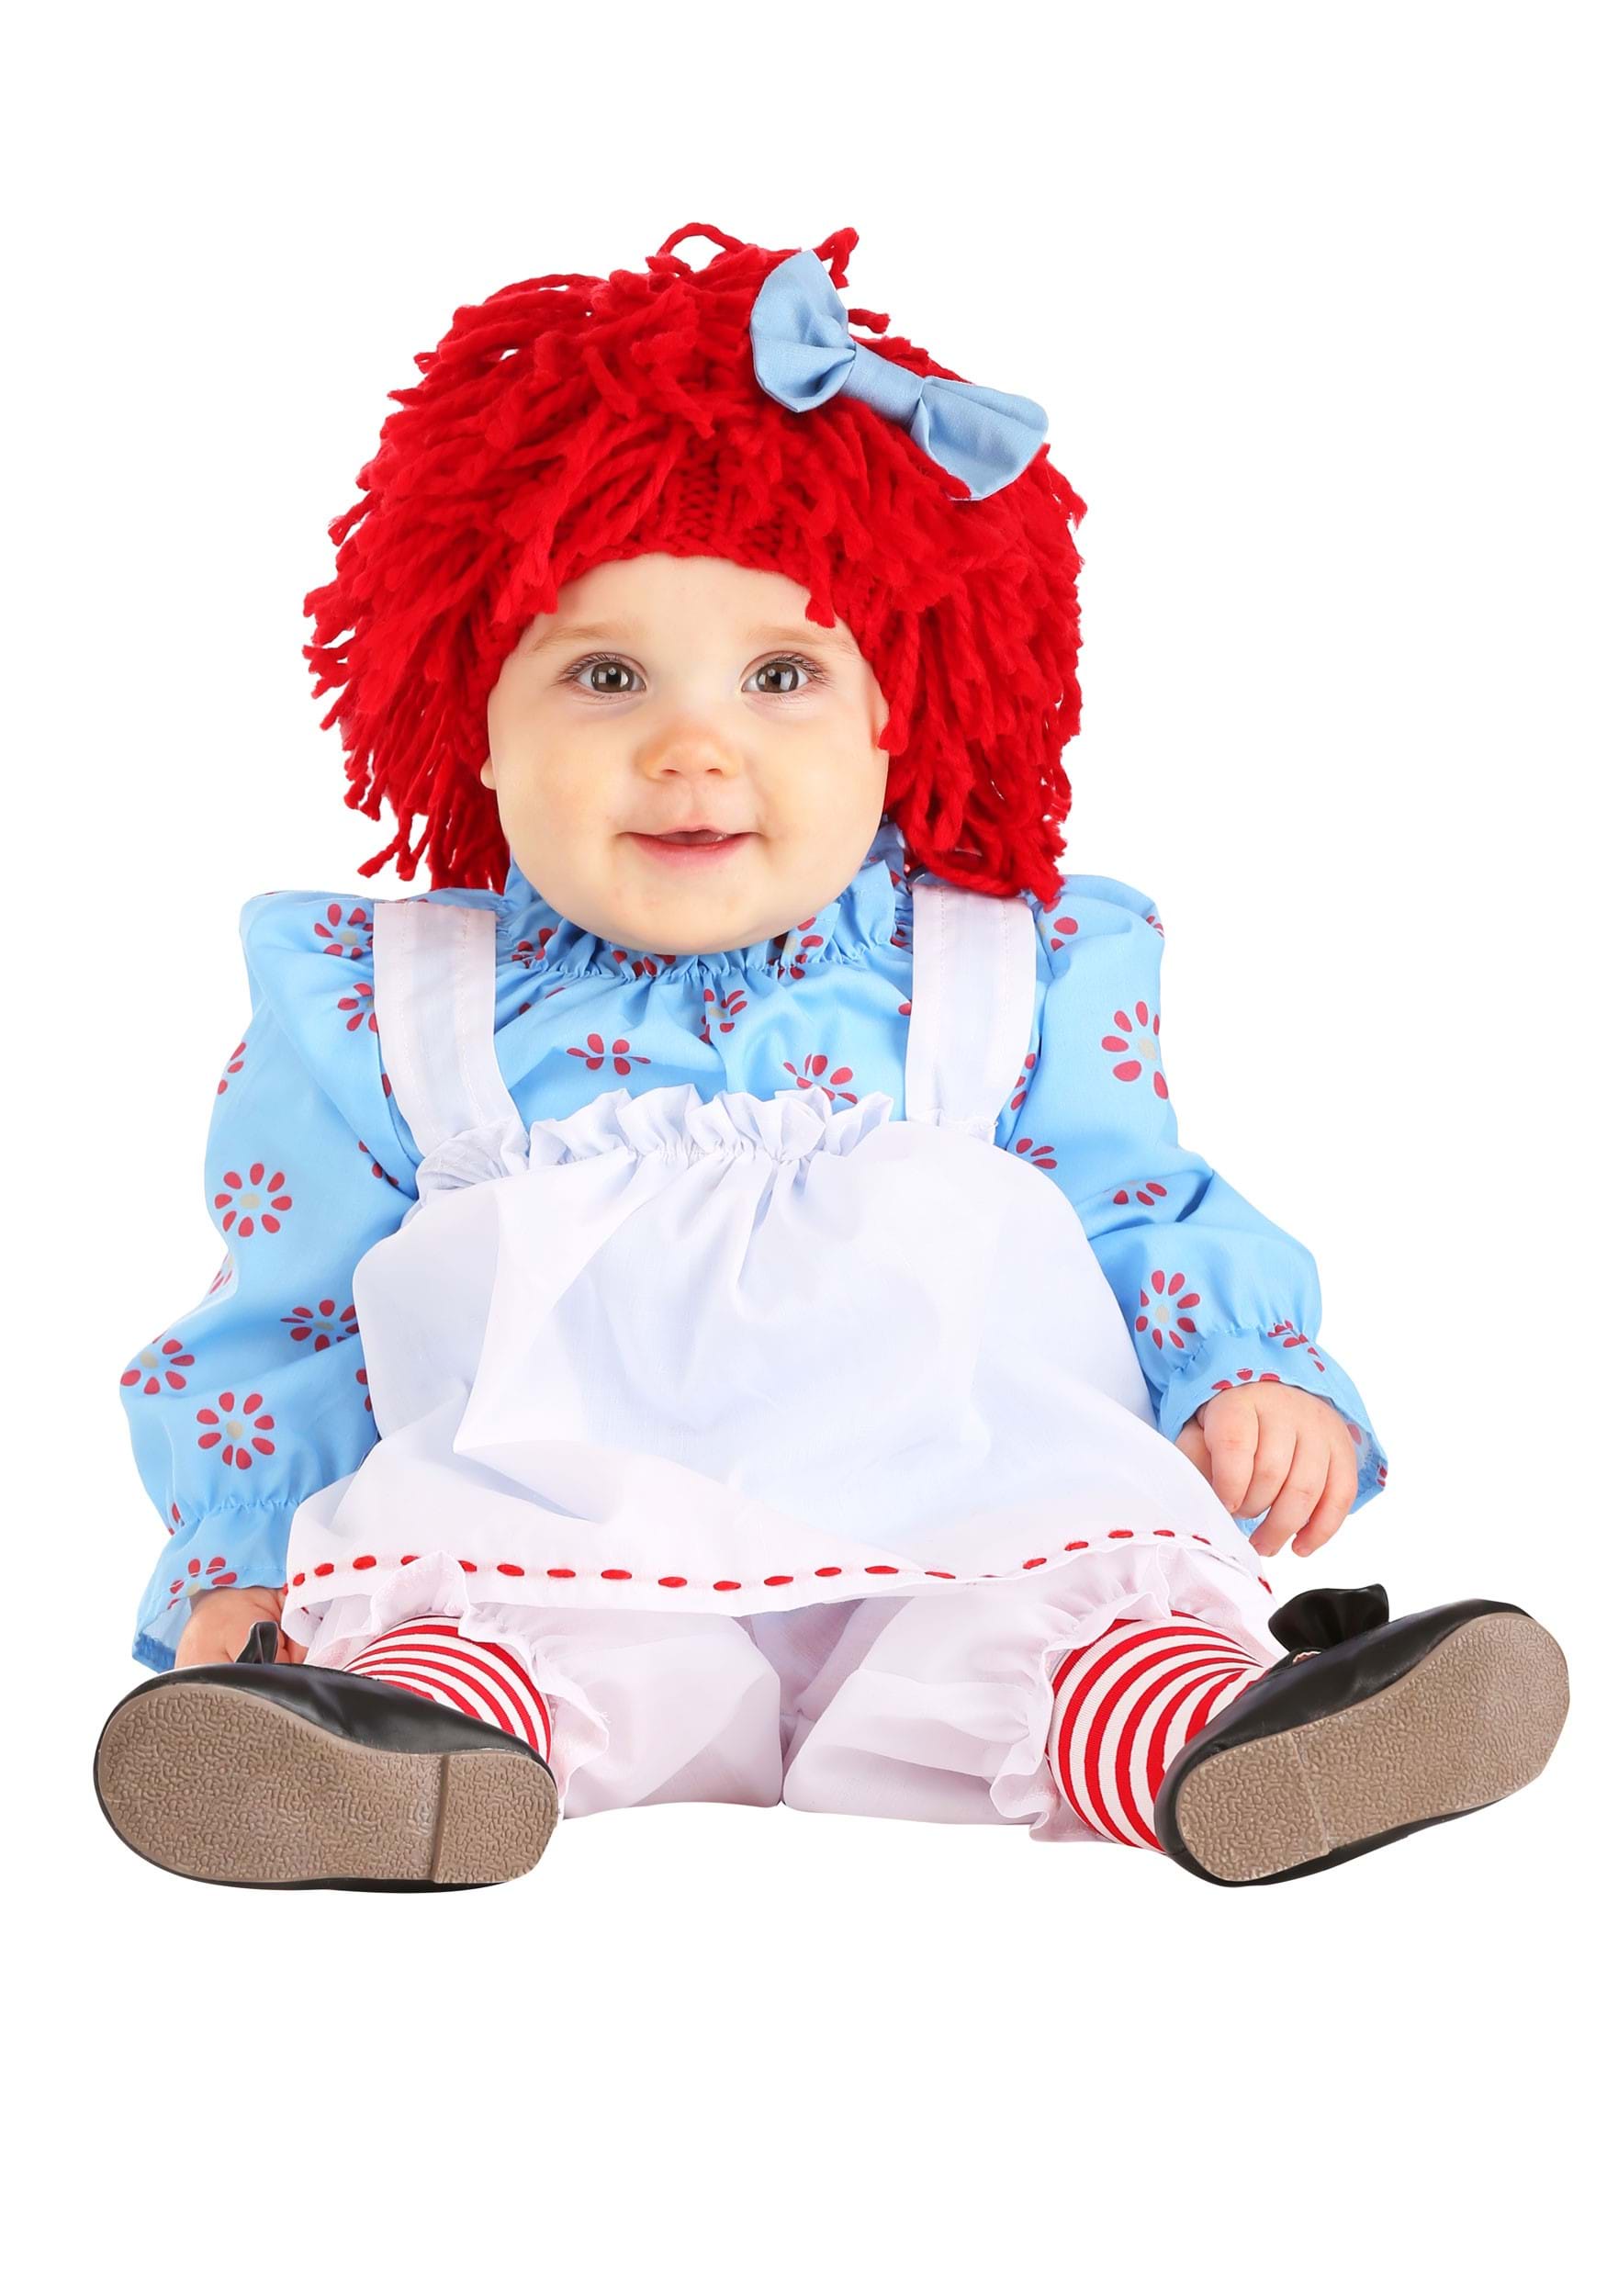 Photos - Fancy Dress FUN Costumes Raggedy Ann Infant Costume Blue/Red/White FUN1740IN